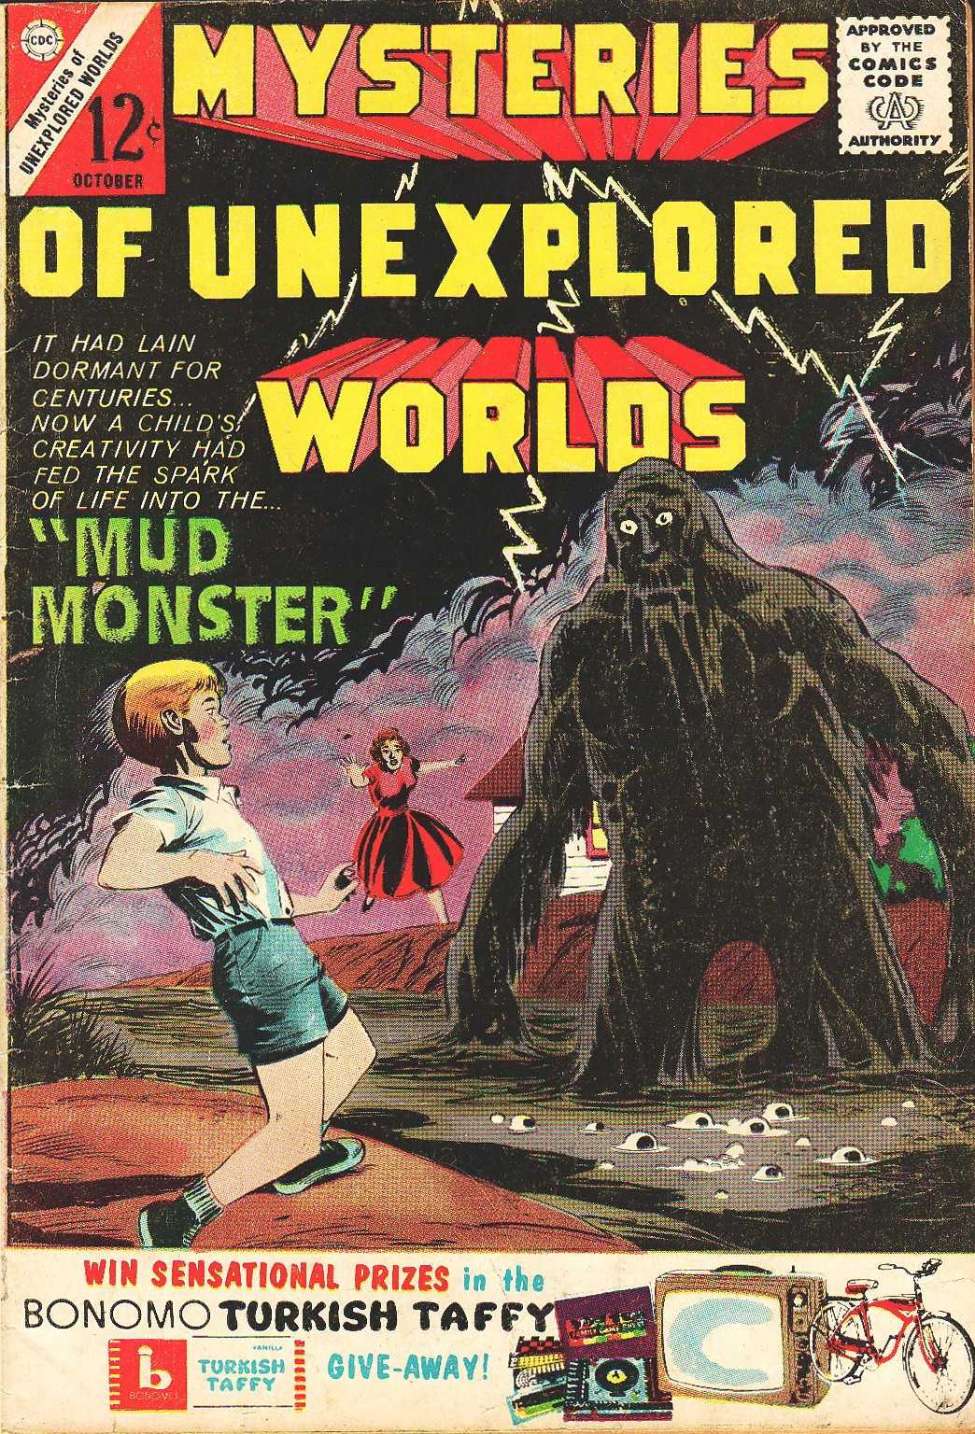 Book Cover For Mysteries of Unexplored Worlds 38